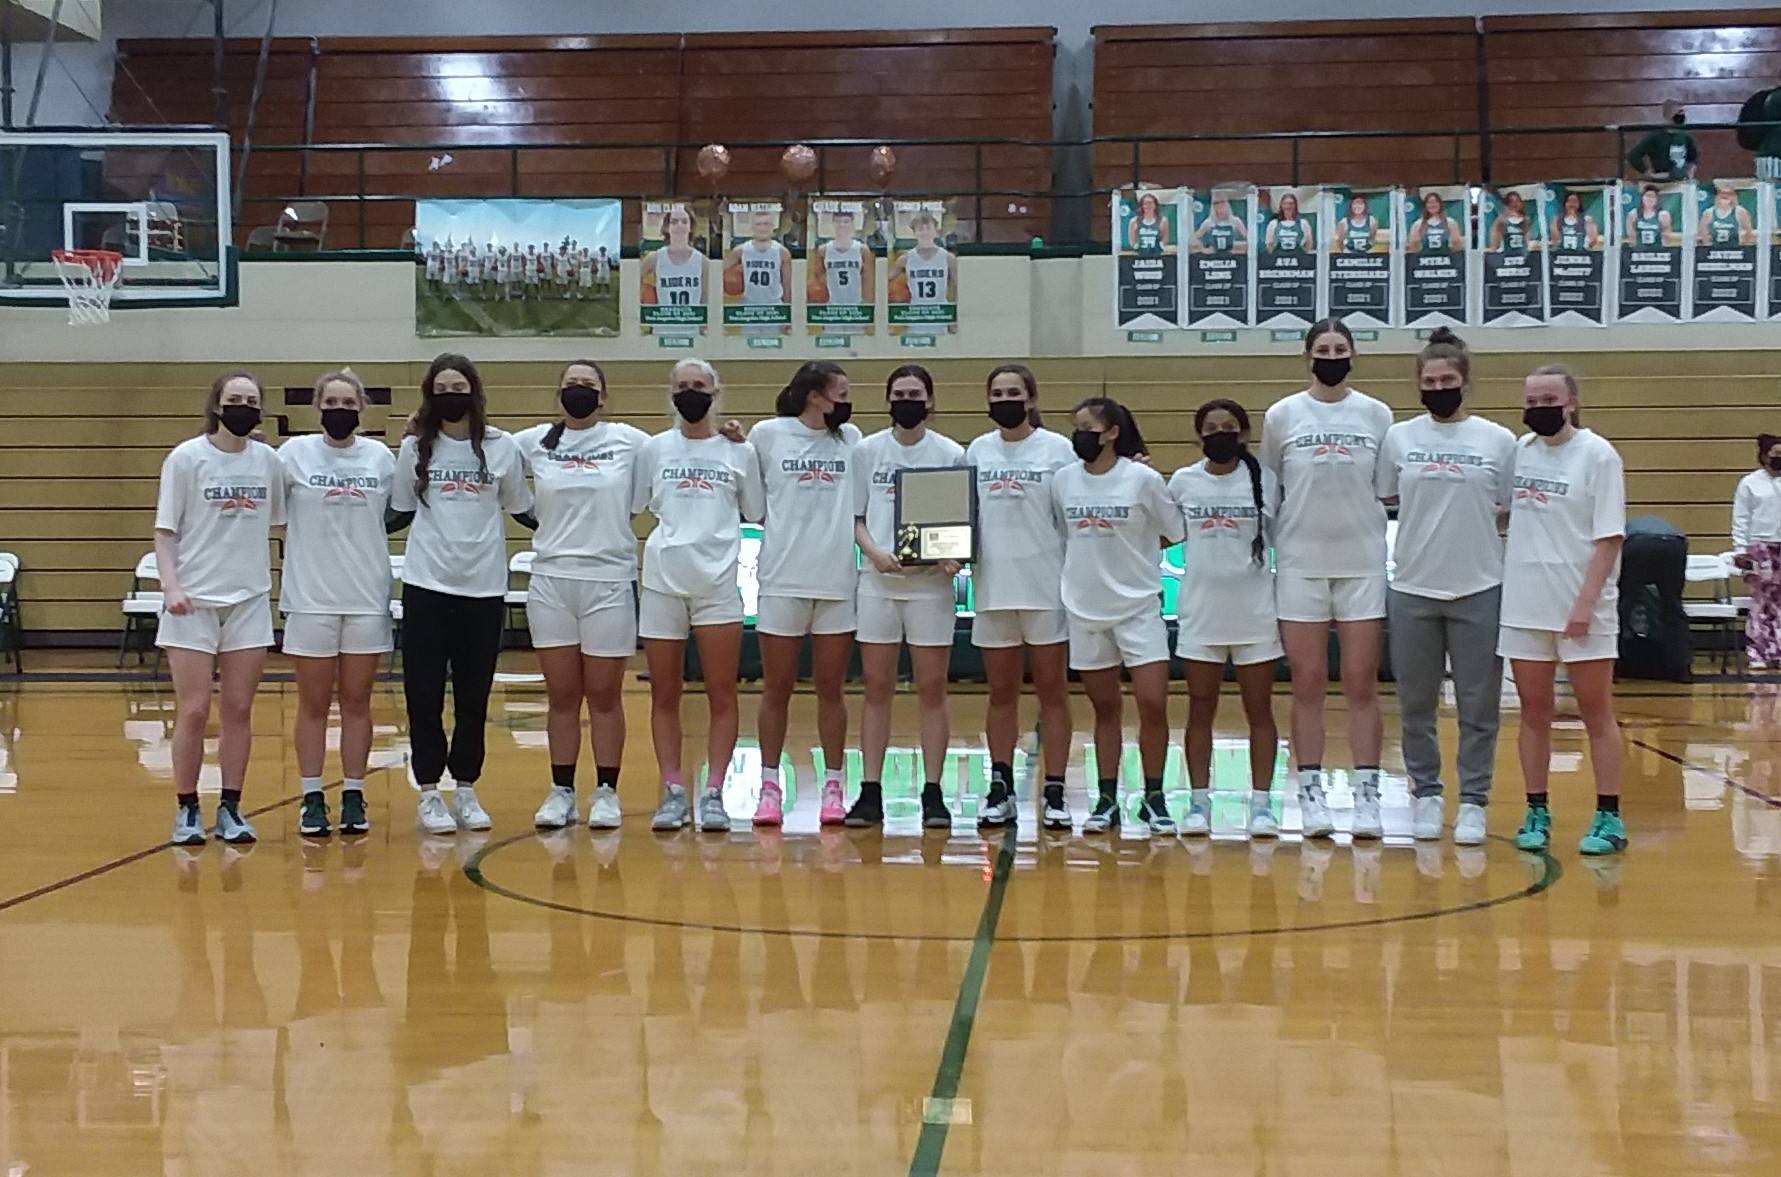 The Port Angeles girls basketball team finished its season 15-0, winning the regular season Olympic League title and the Olympic League Tournament. (Pierre LaBossiere/Peninsula Daily News)